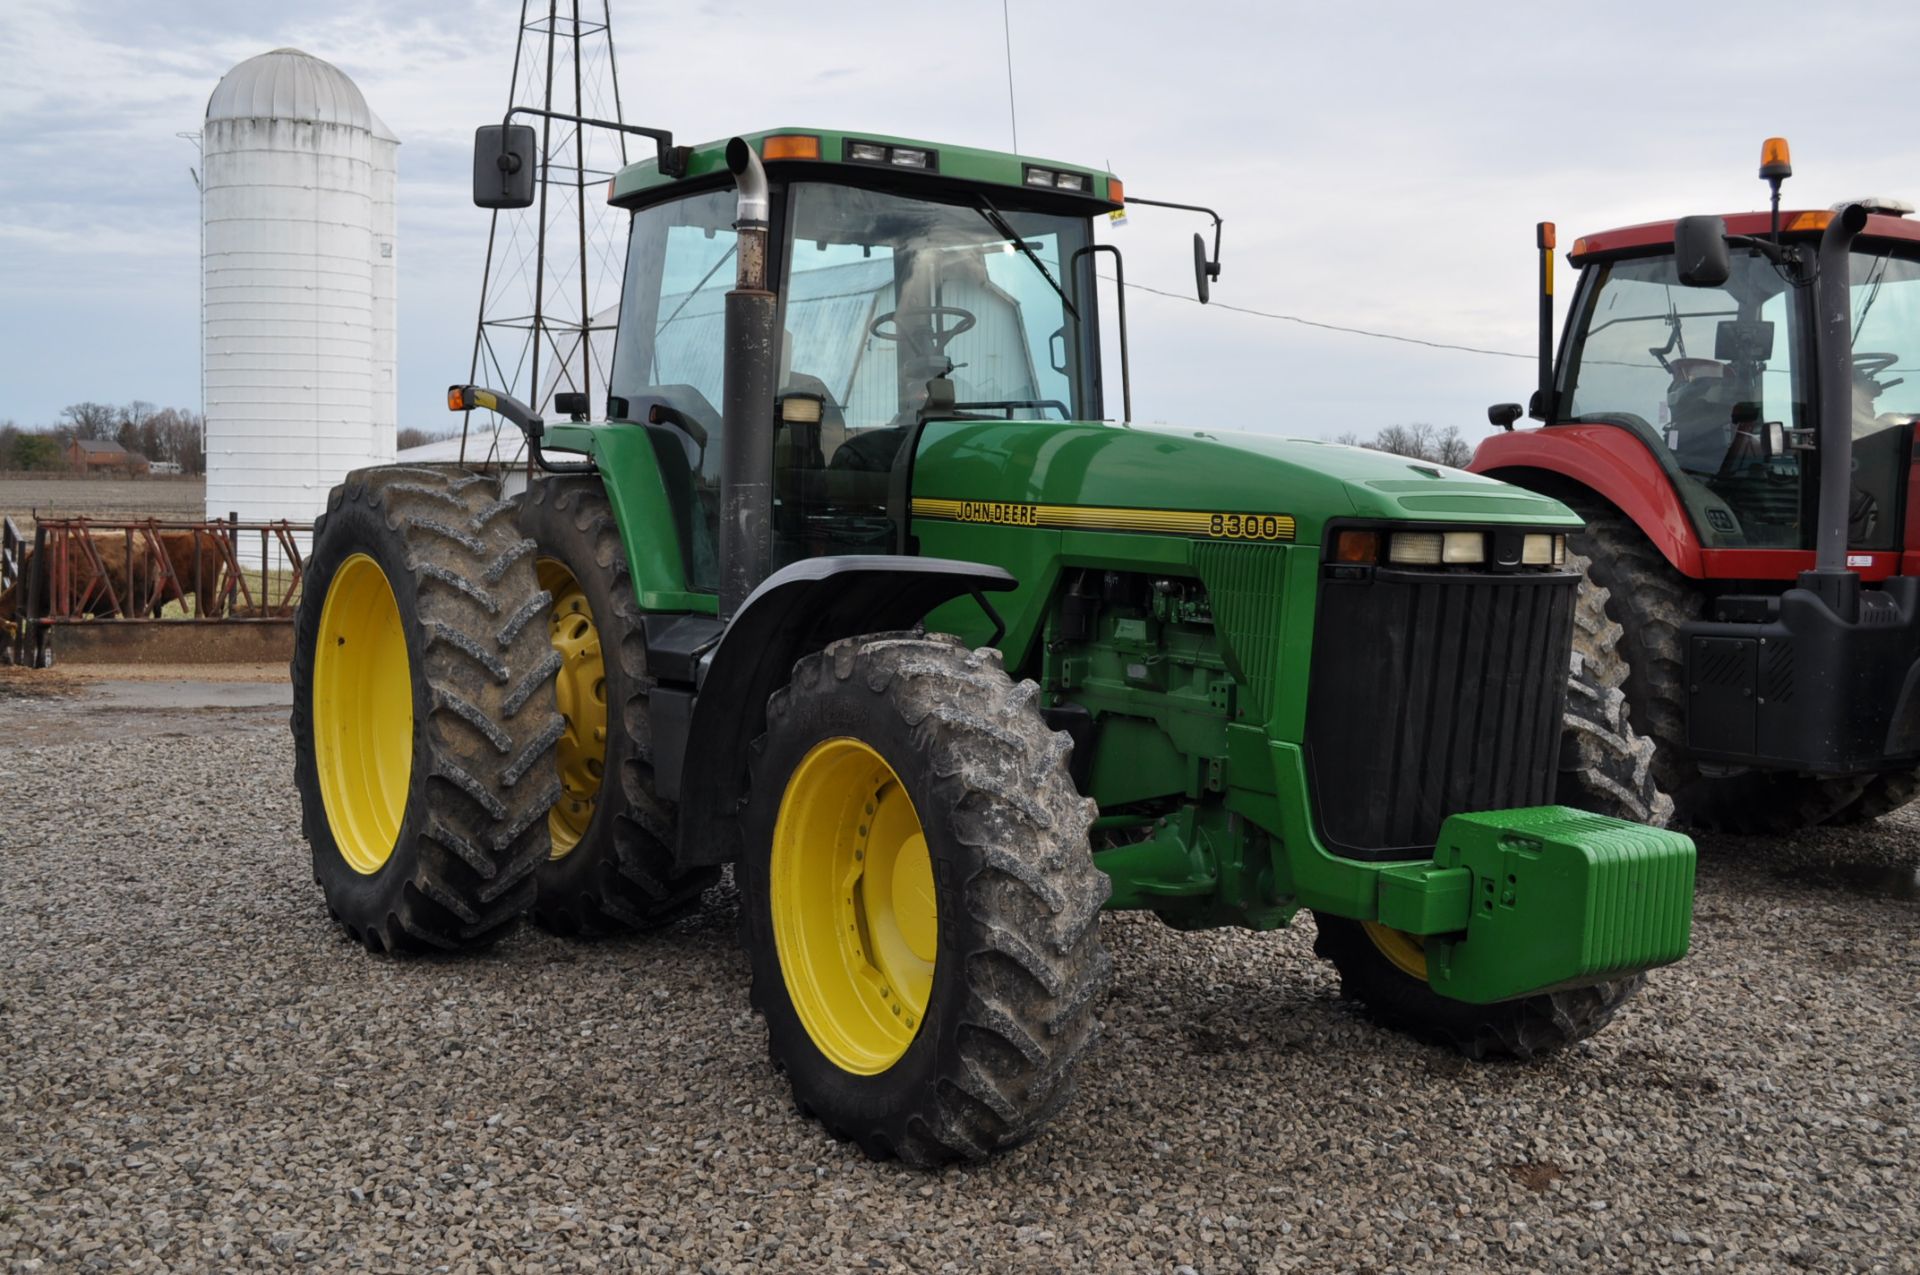 John Deere 8300 tractor, MFWD, 480/80 R 46 duals, 380/85 R 34 front, fenders, front wts, 4 hyd - Image 4 of 21